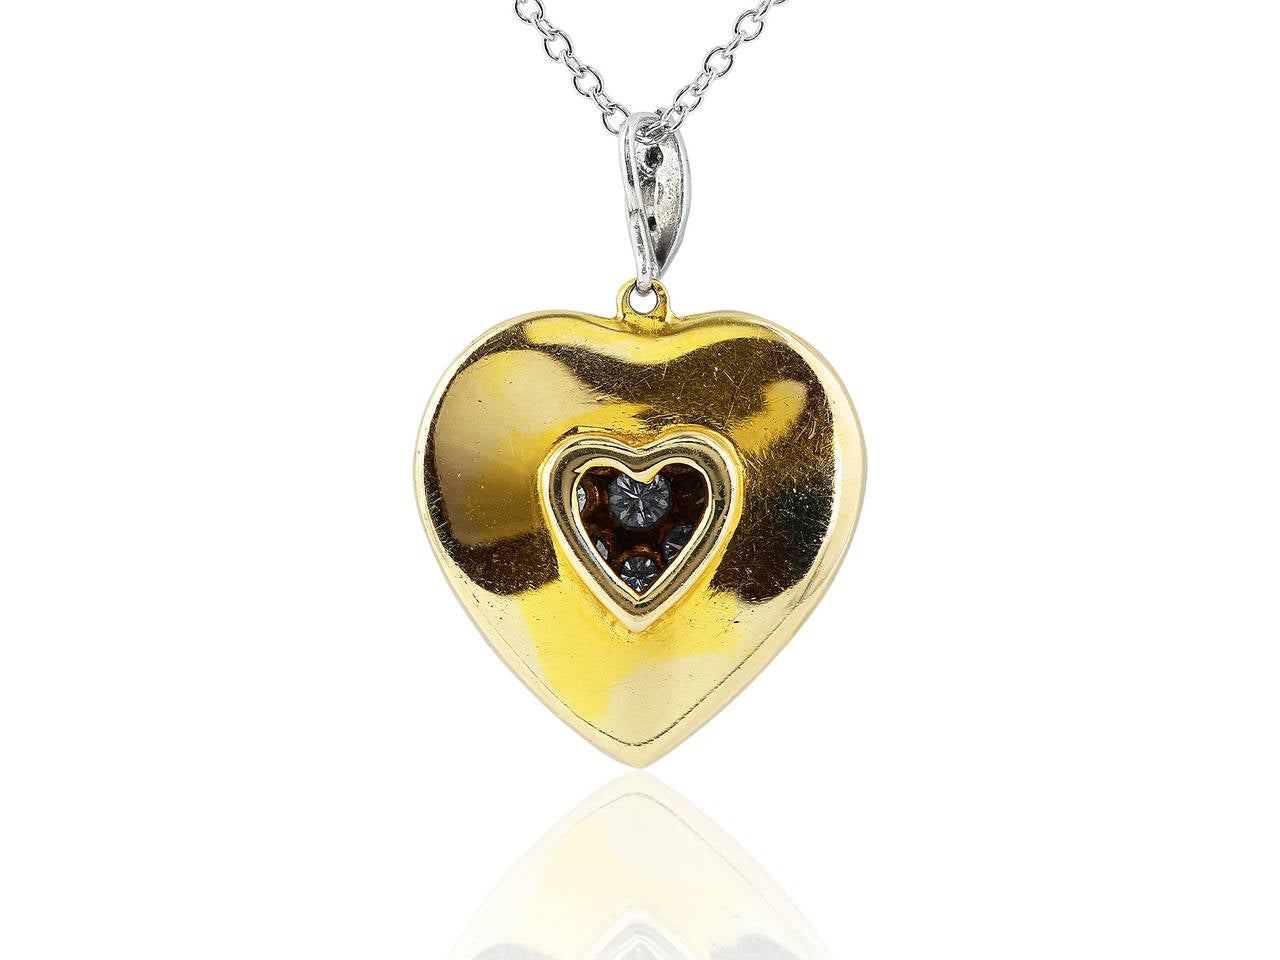 Estate Two tone 18 karat yellow and white gold heart shape pendant pave set with full cut diamond accents having an estimated total weight of 3.00 carats on an 18 inch 18 karat white gold cable link chain.